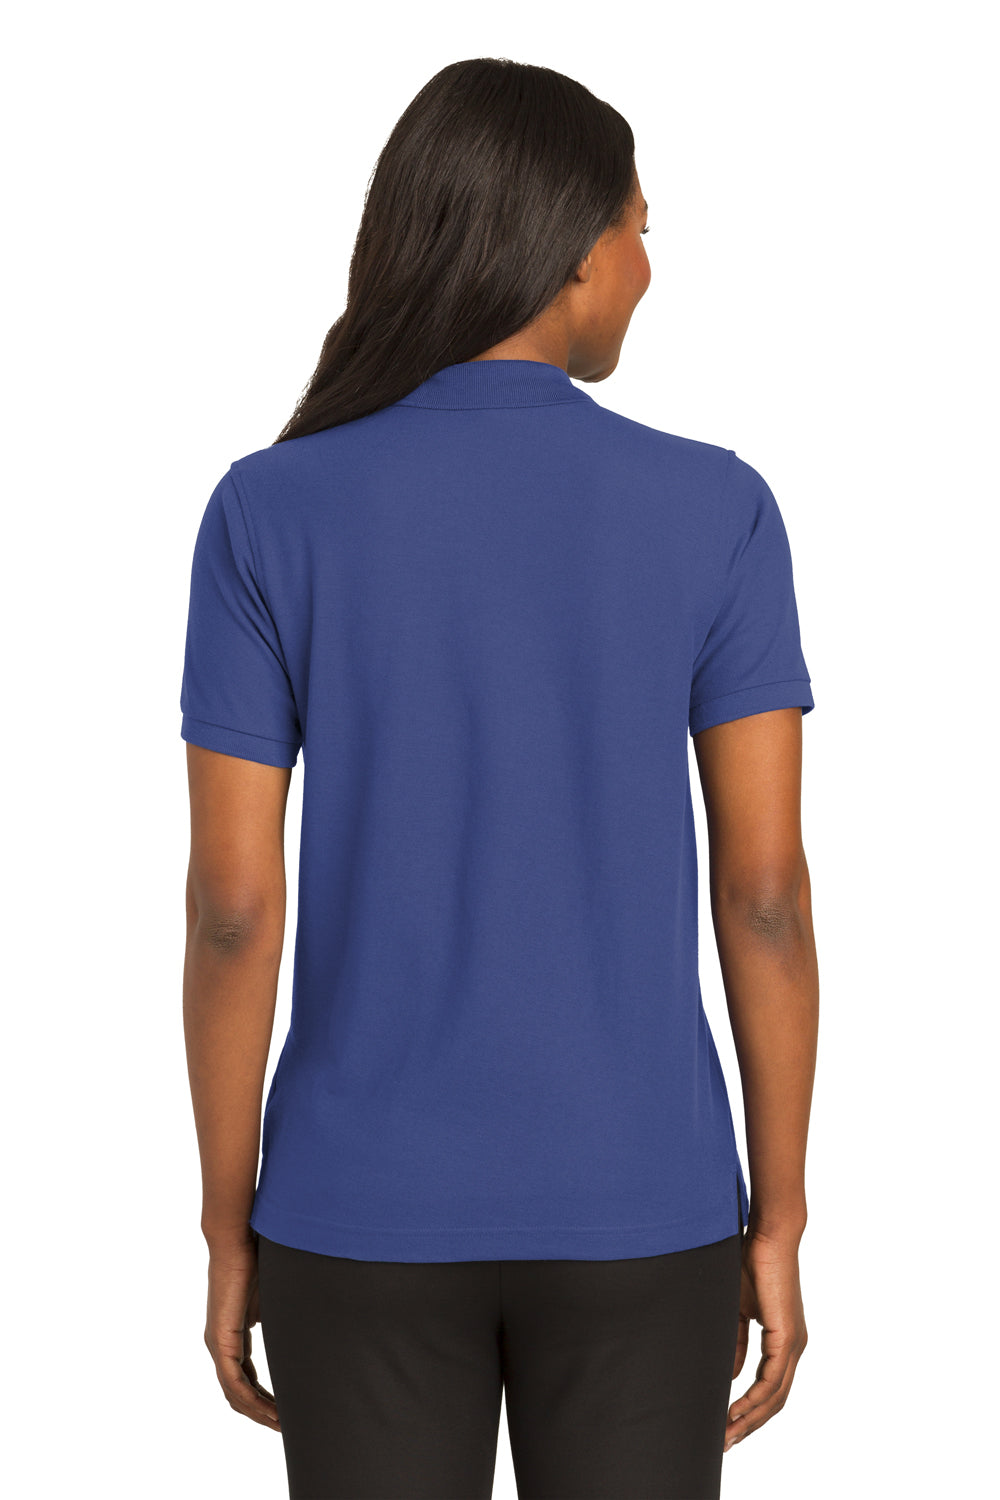 Port Authority L500 Womens Silk Touch Wrinkle Resistant Short Sleeve Polo Shirt Mediterranean Blue Back